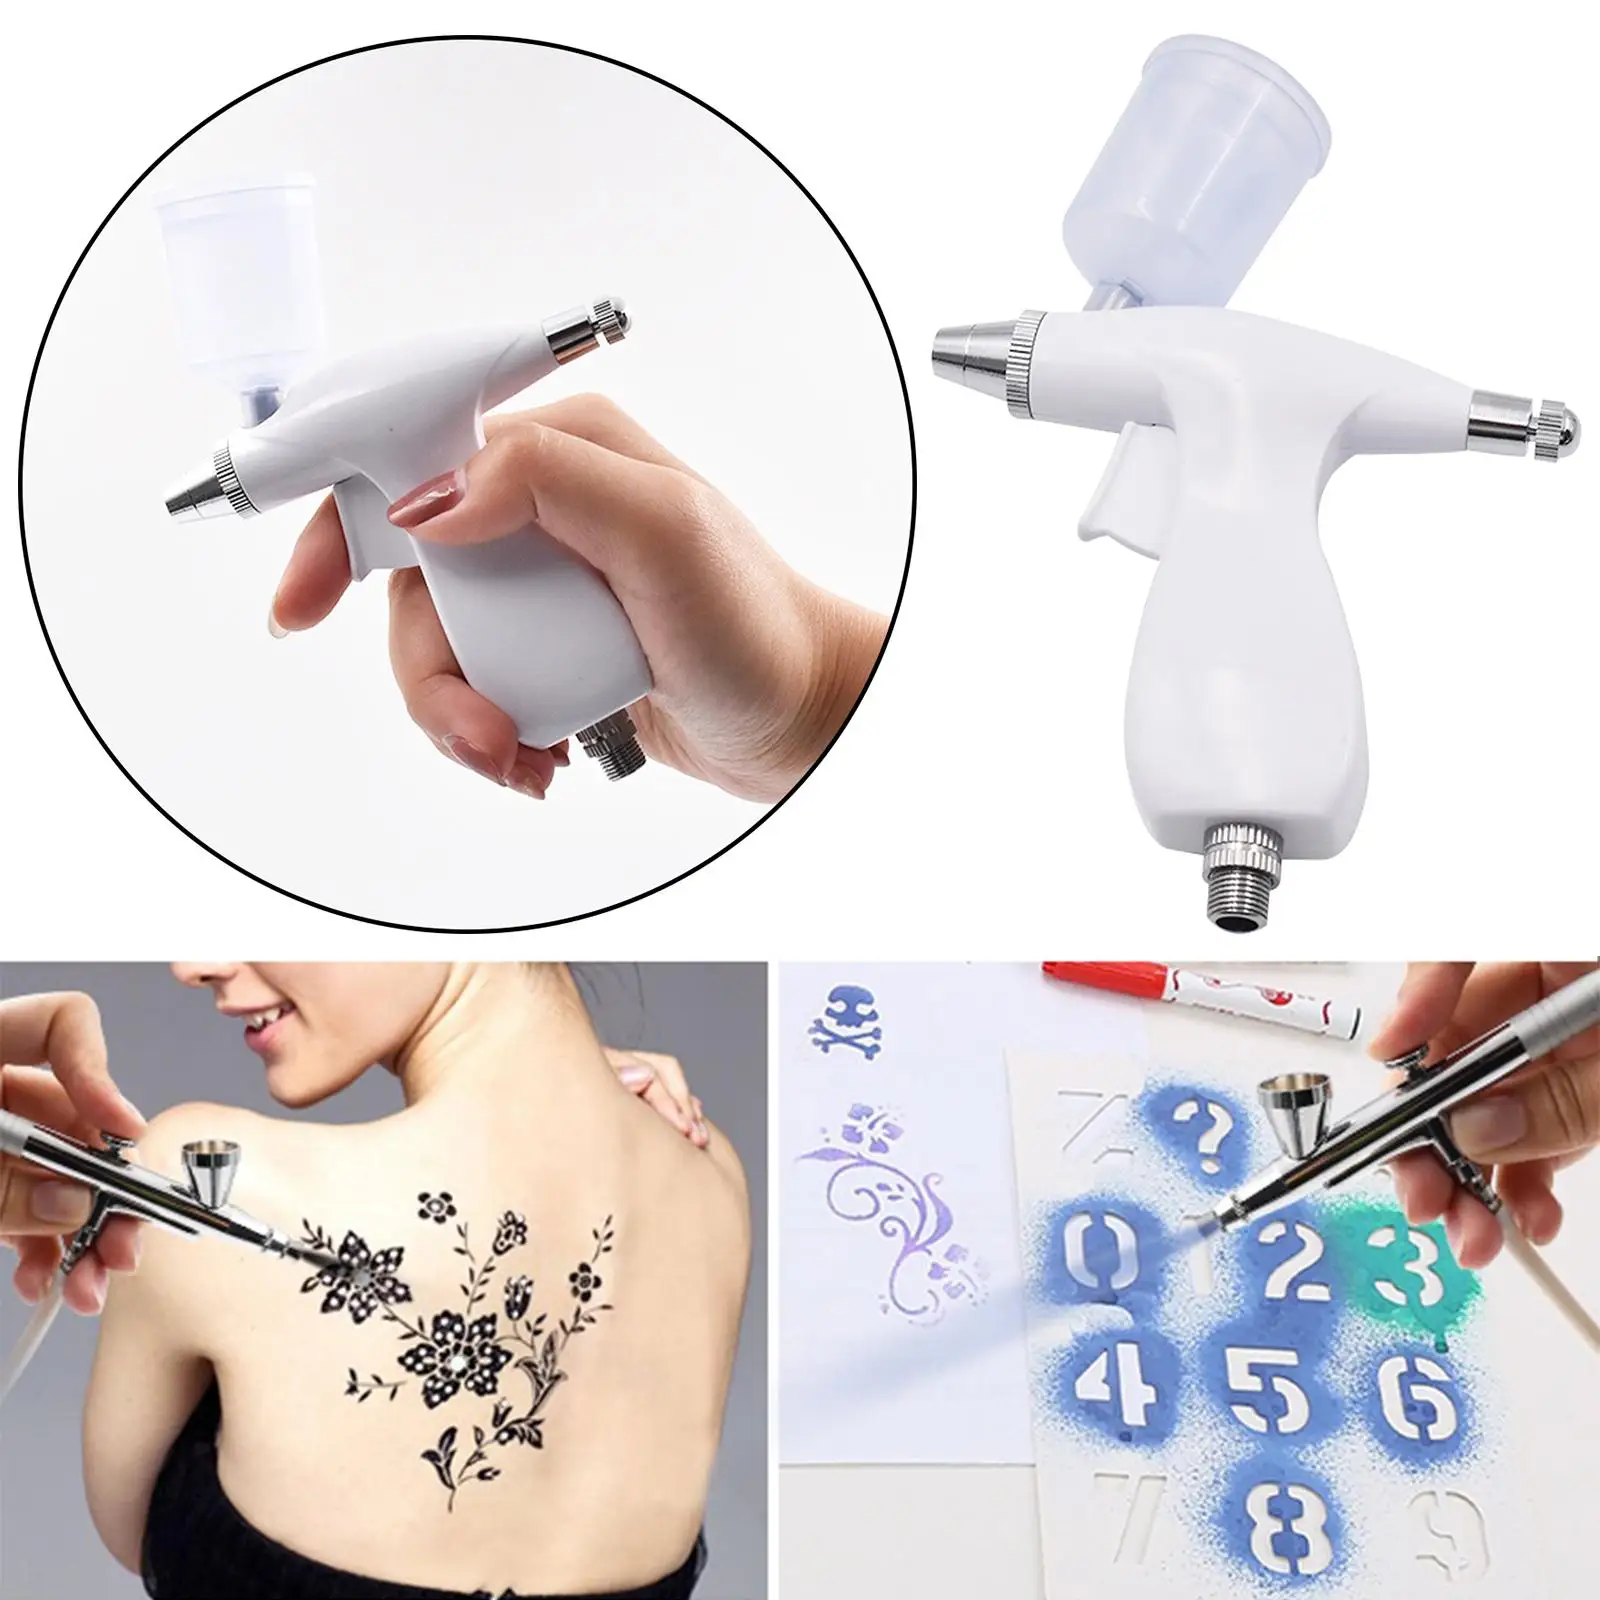 Mini Airbrush Spray Gun Airbrush Nozzle for Makeup Painting, Drawing & Art Supplies Cake Decorating Tattoo Face Paint